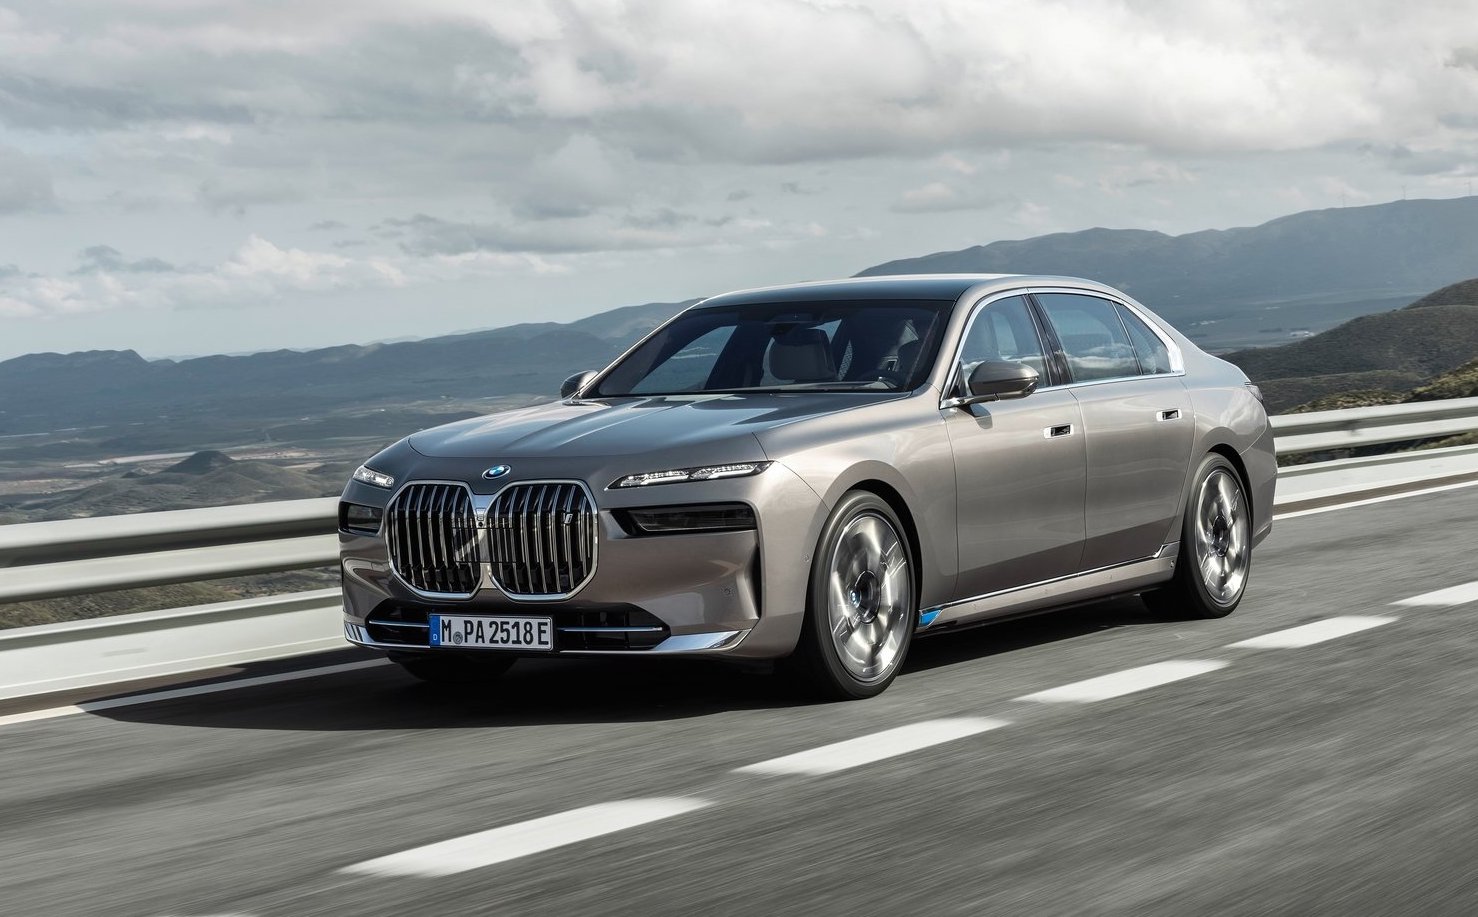 2023 BMW 7 Series & i7 prices and details confirmed for Australia